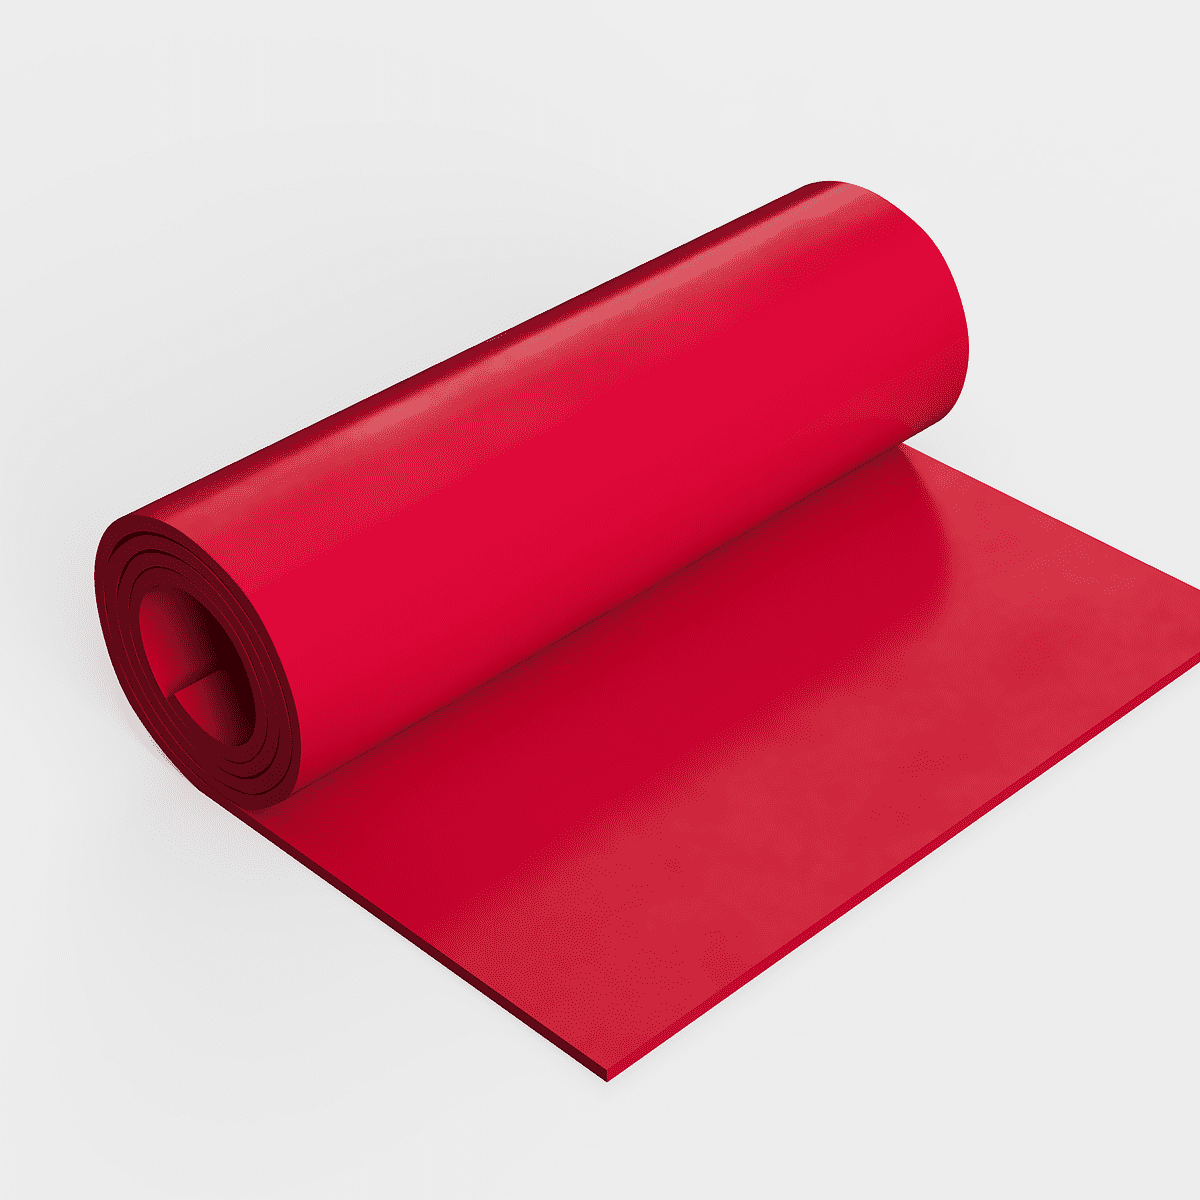 Solid rubber red